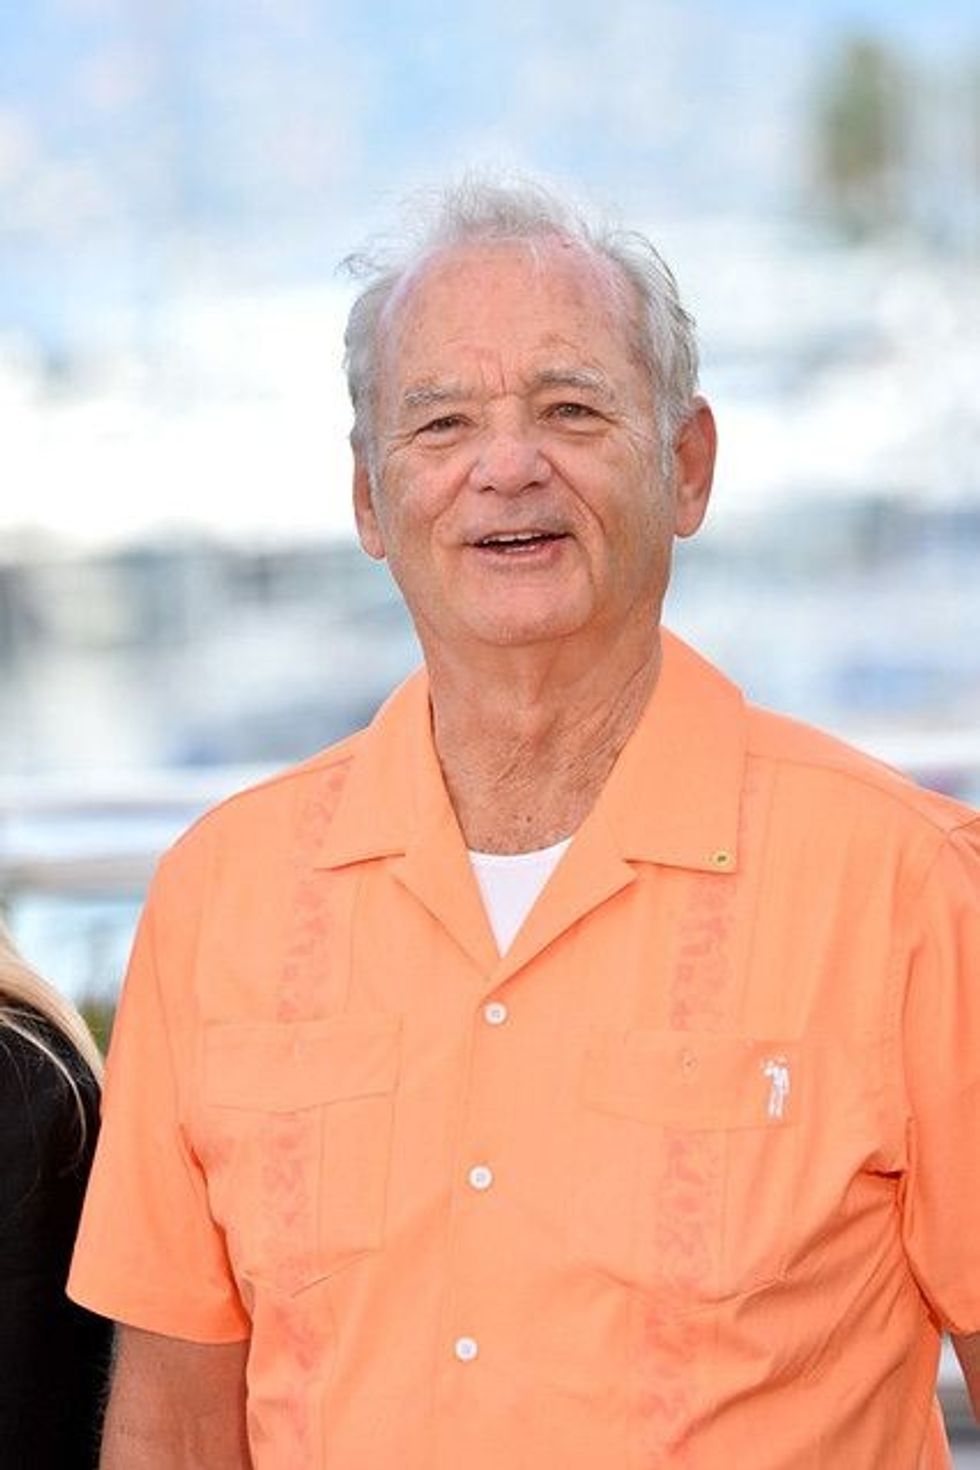 Here is an image of Bill Murray Attending Isle Dogs Press.